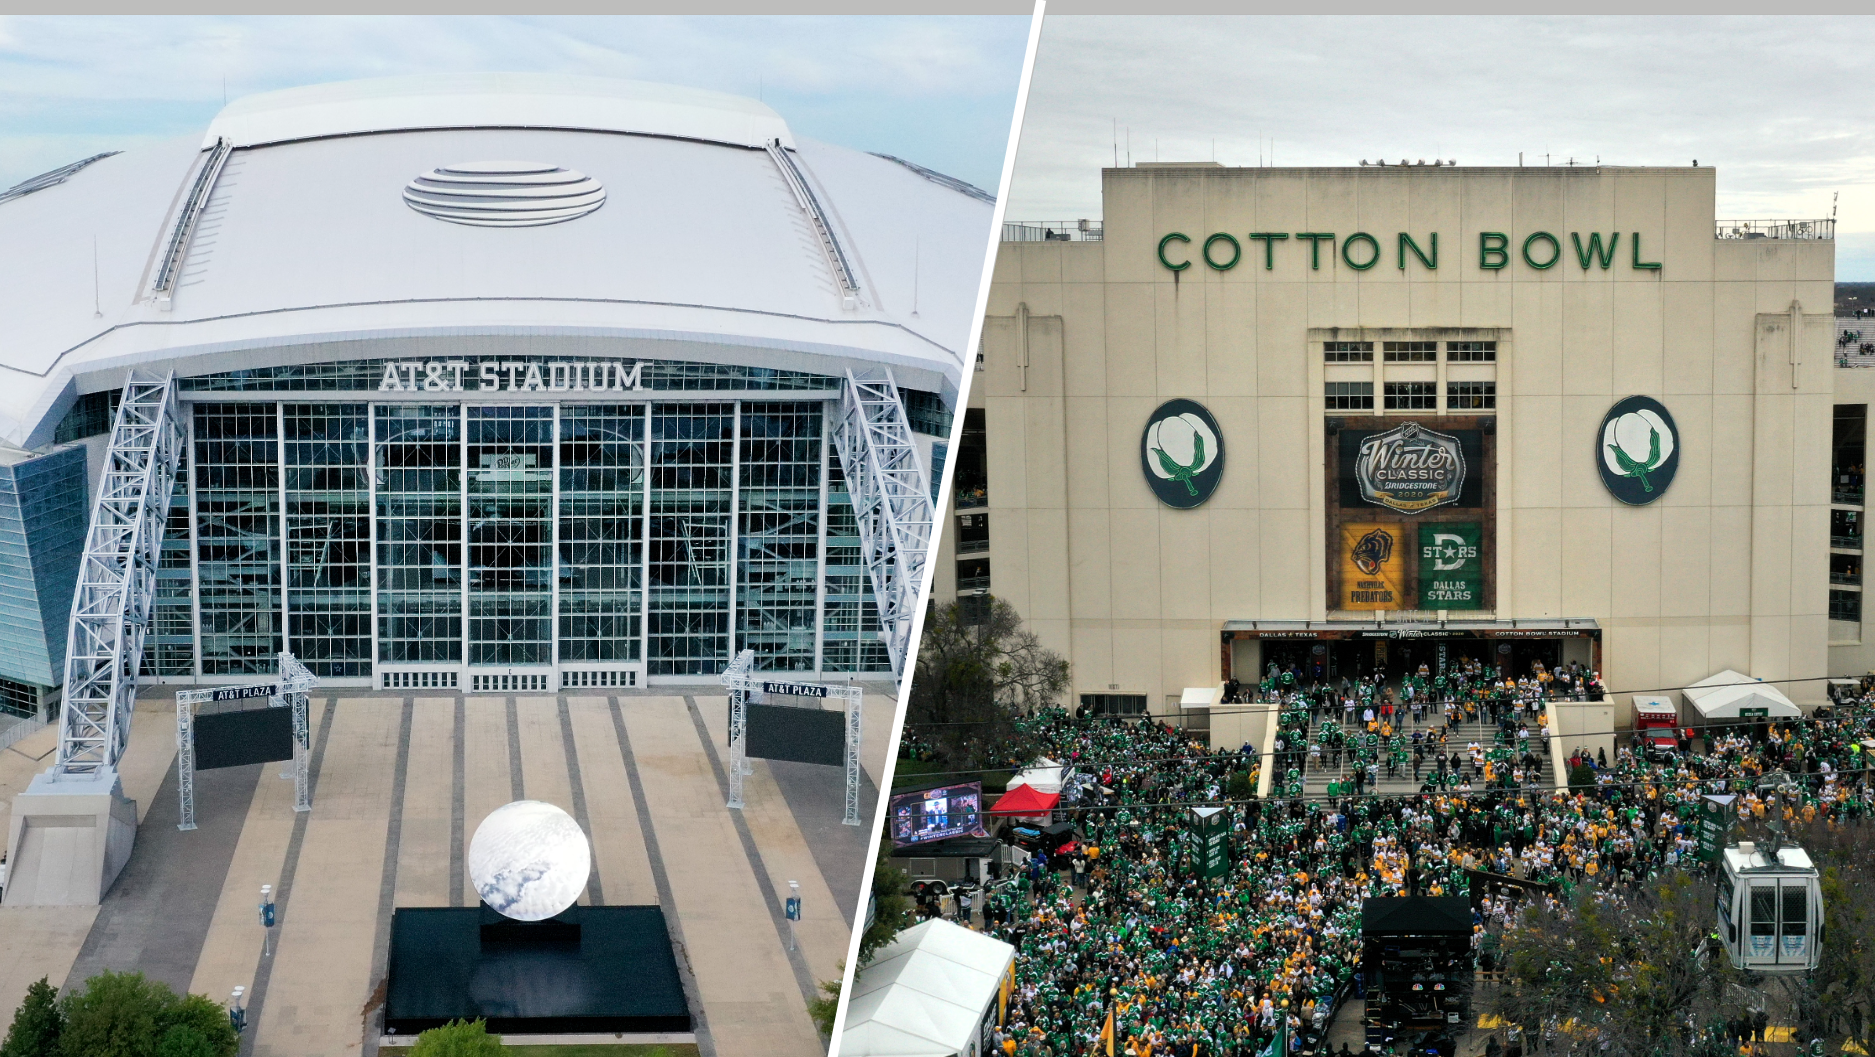 AT&T Stadium, Cotton Bowl among Top 5 most convenient sports venues in
the US